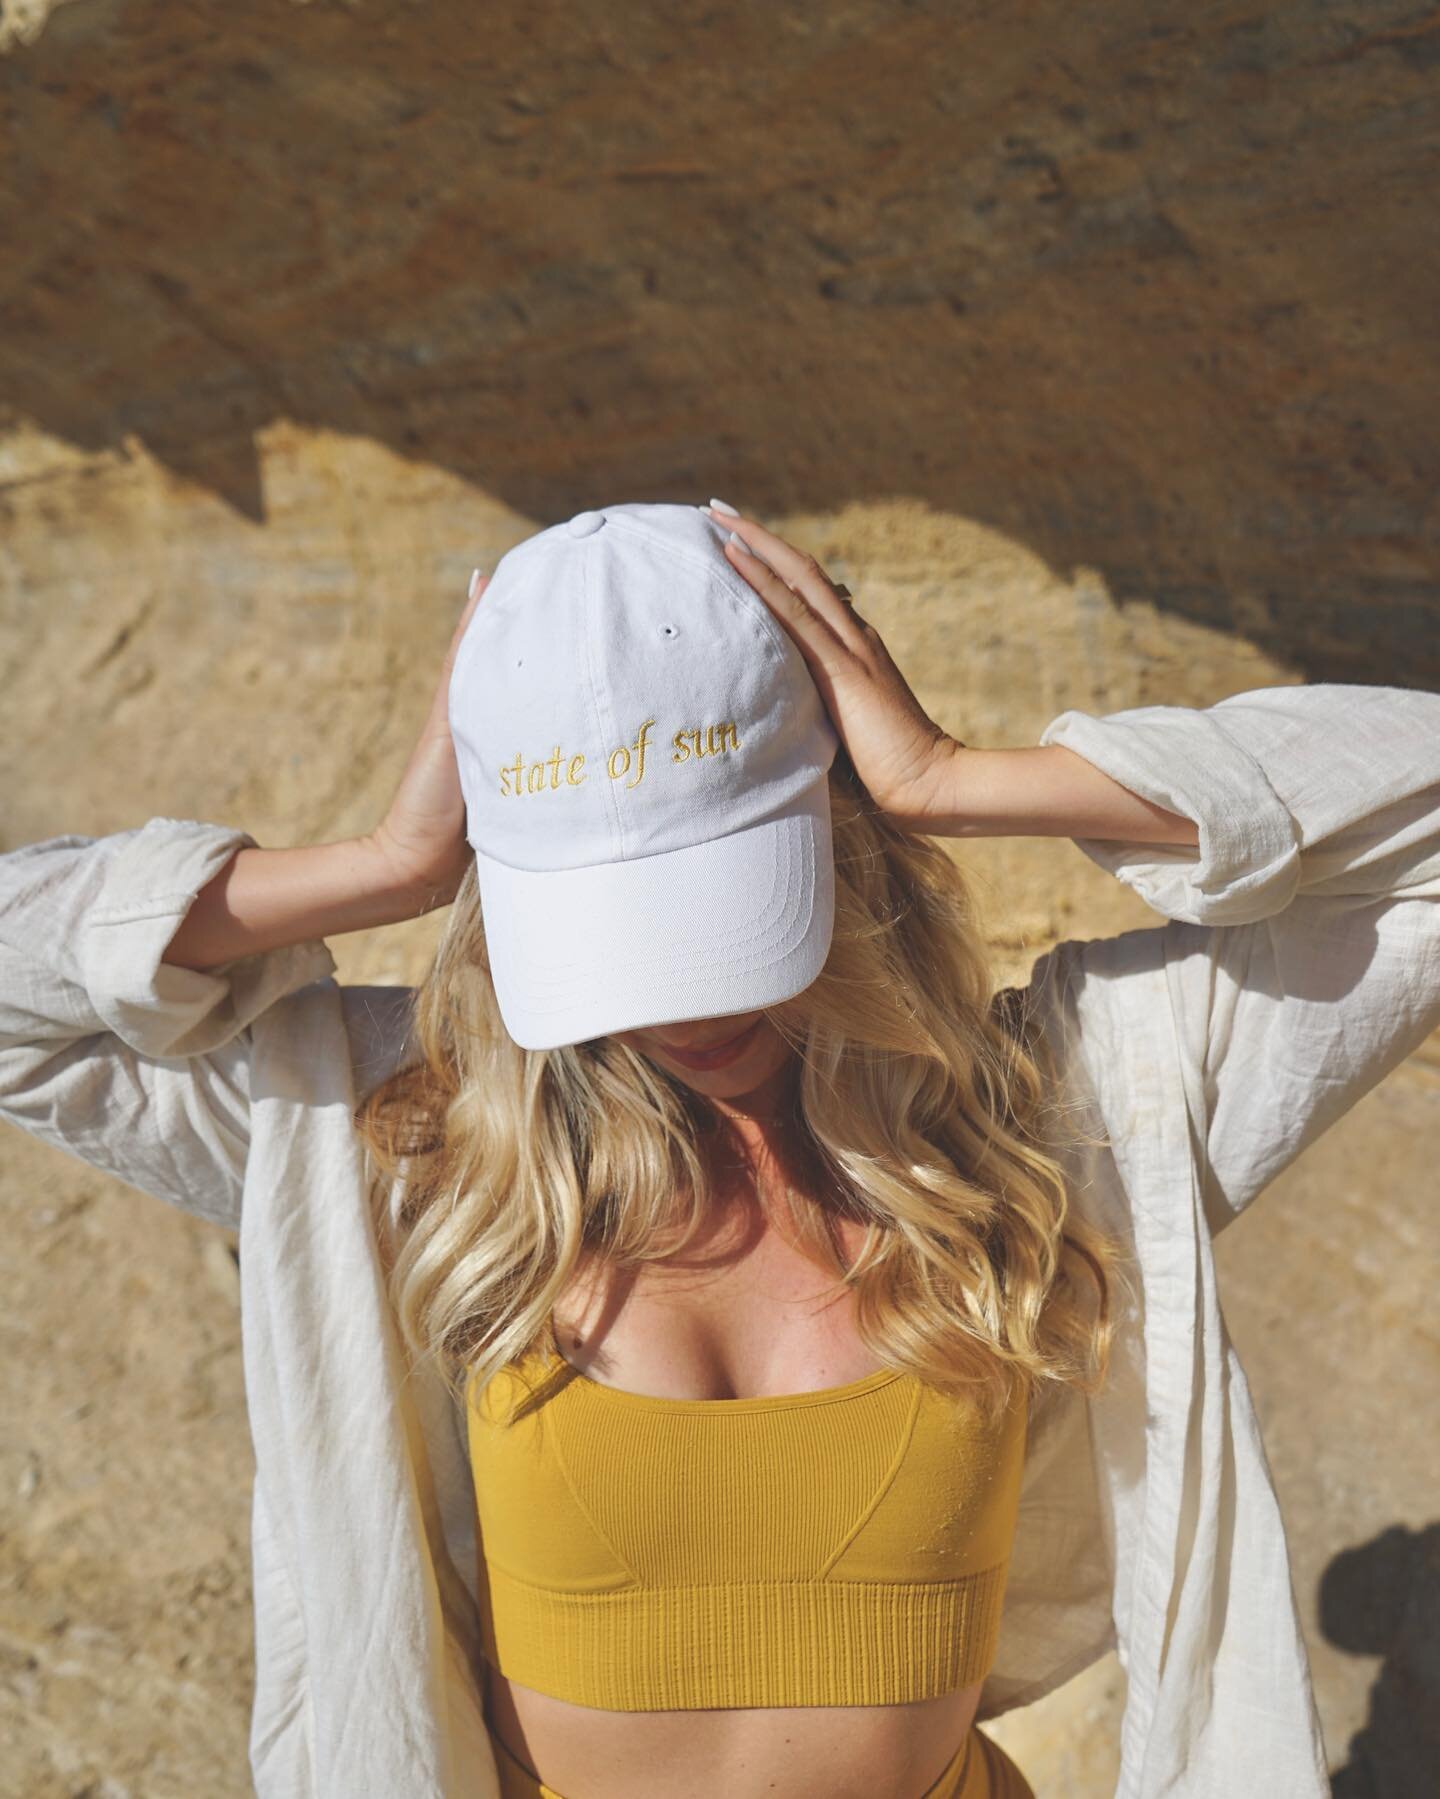 Launching the state of sun apparel 🌞

Embroidered hats available for pre-order now! The perfect light and bright addition for sunny days.

Cost: $30 + shipping

Comment below to claim one in this first batch 💛